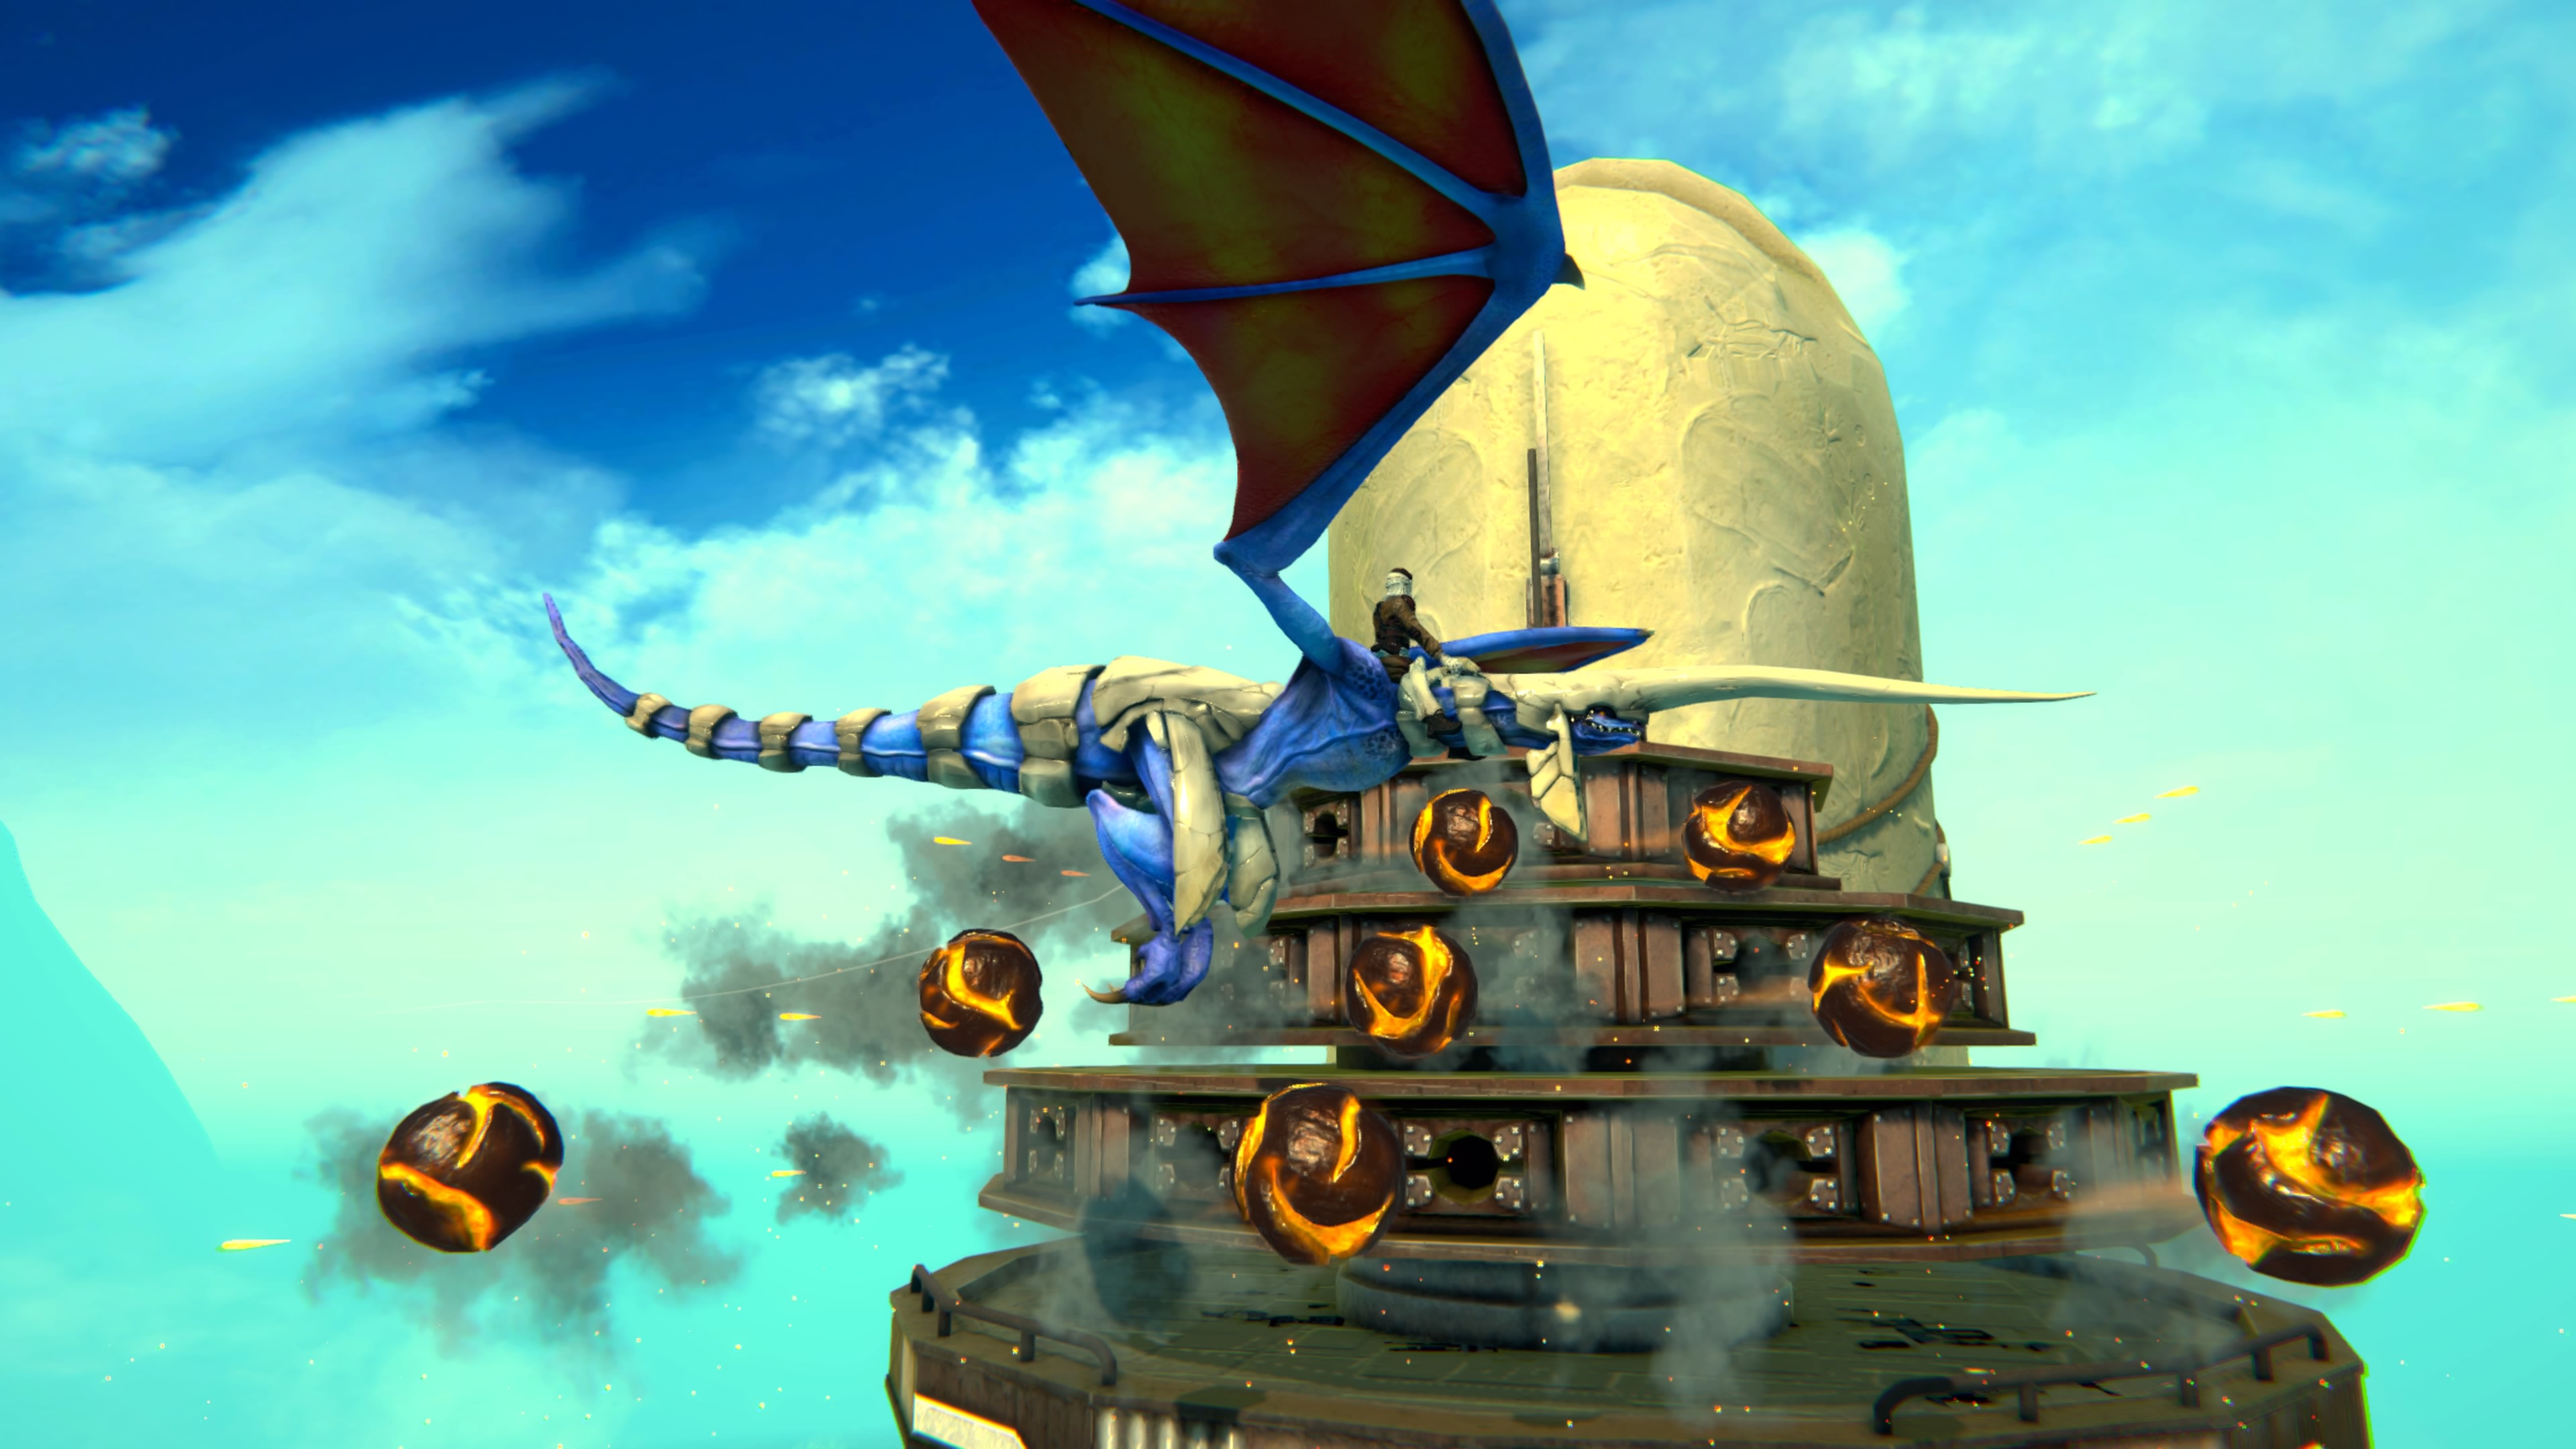 The player must repel cannon balls fired from the Imperial Flying Stronghold.